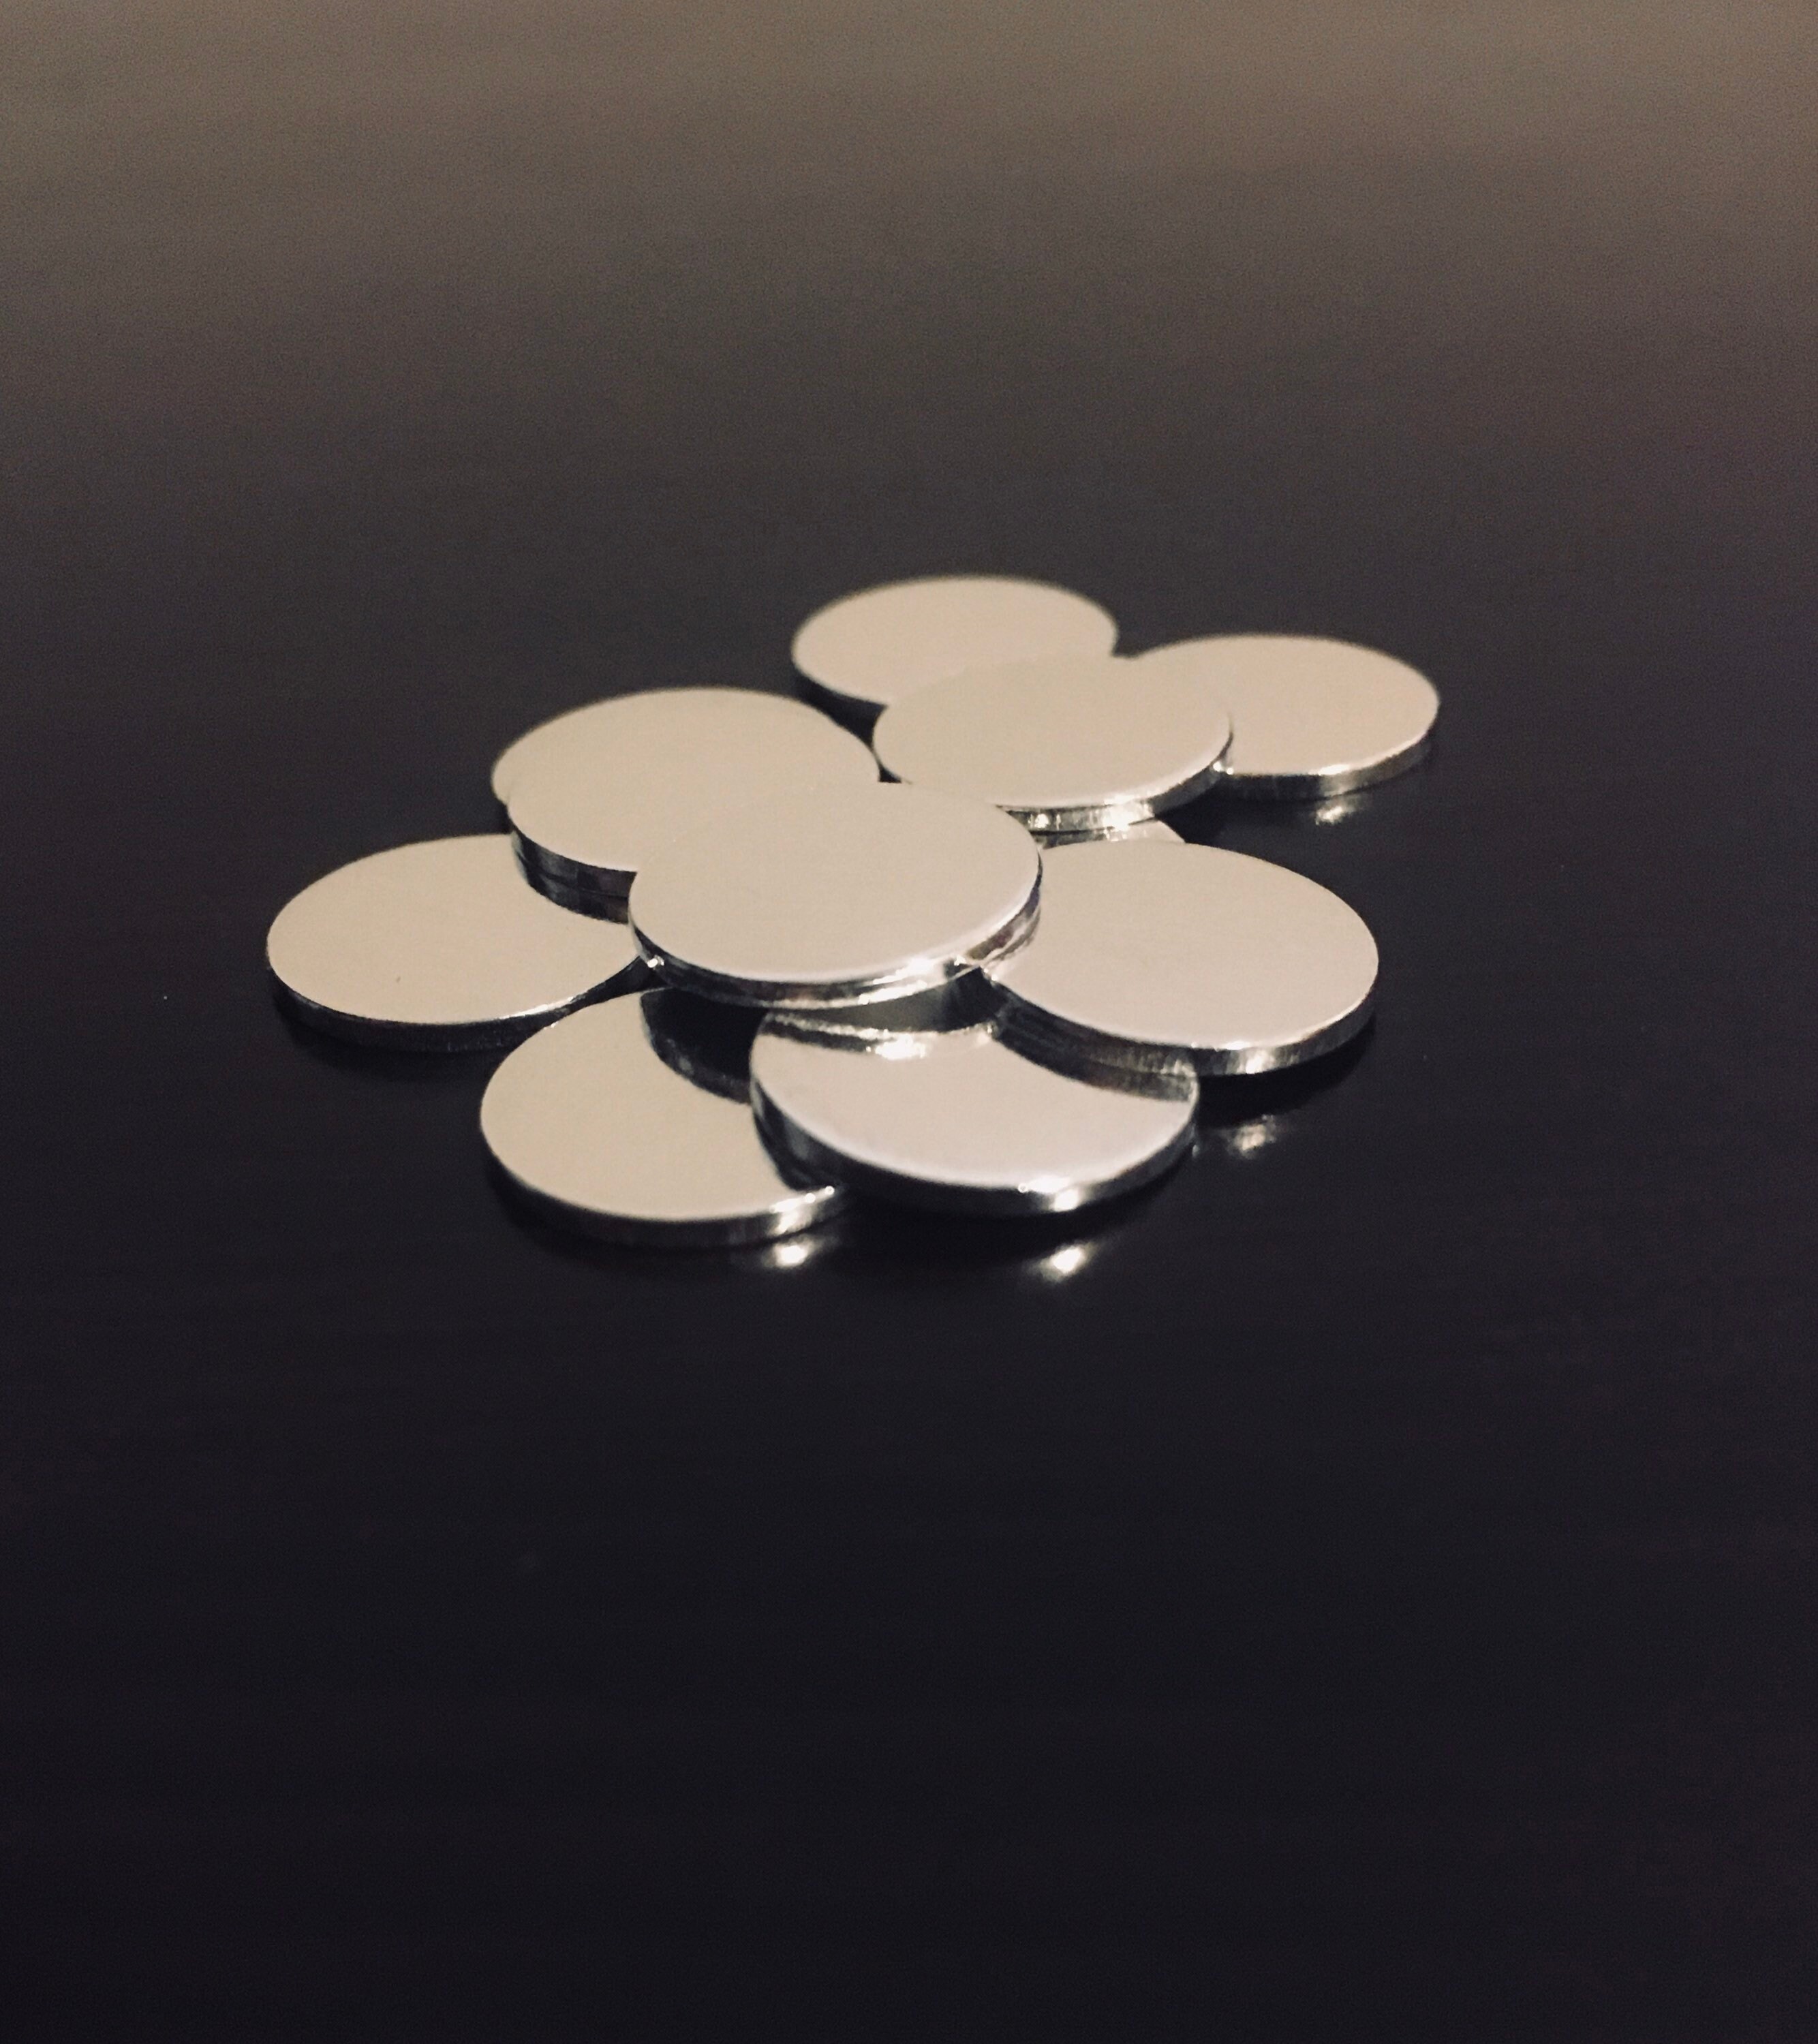 CleverDelights 0.75 Round Stamping Blanks - 50 Pack - 22GA (.025)  Aluminum Discs - 3/4 Inch Diameter